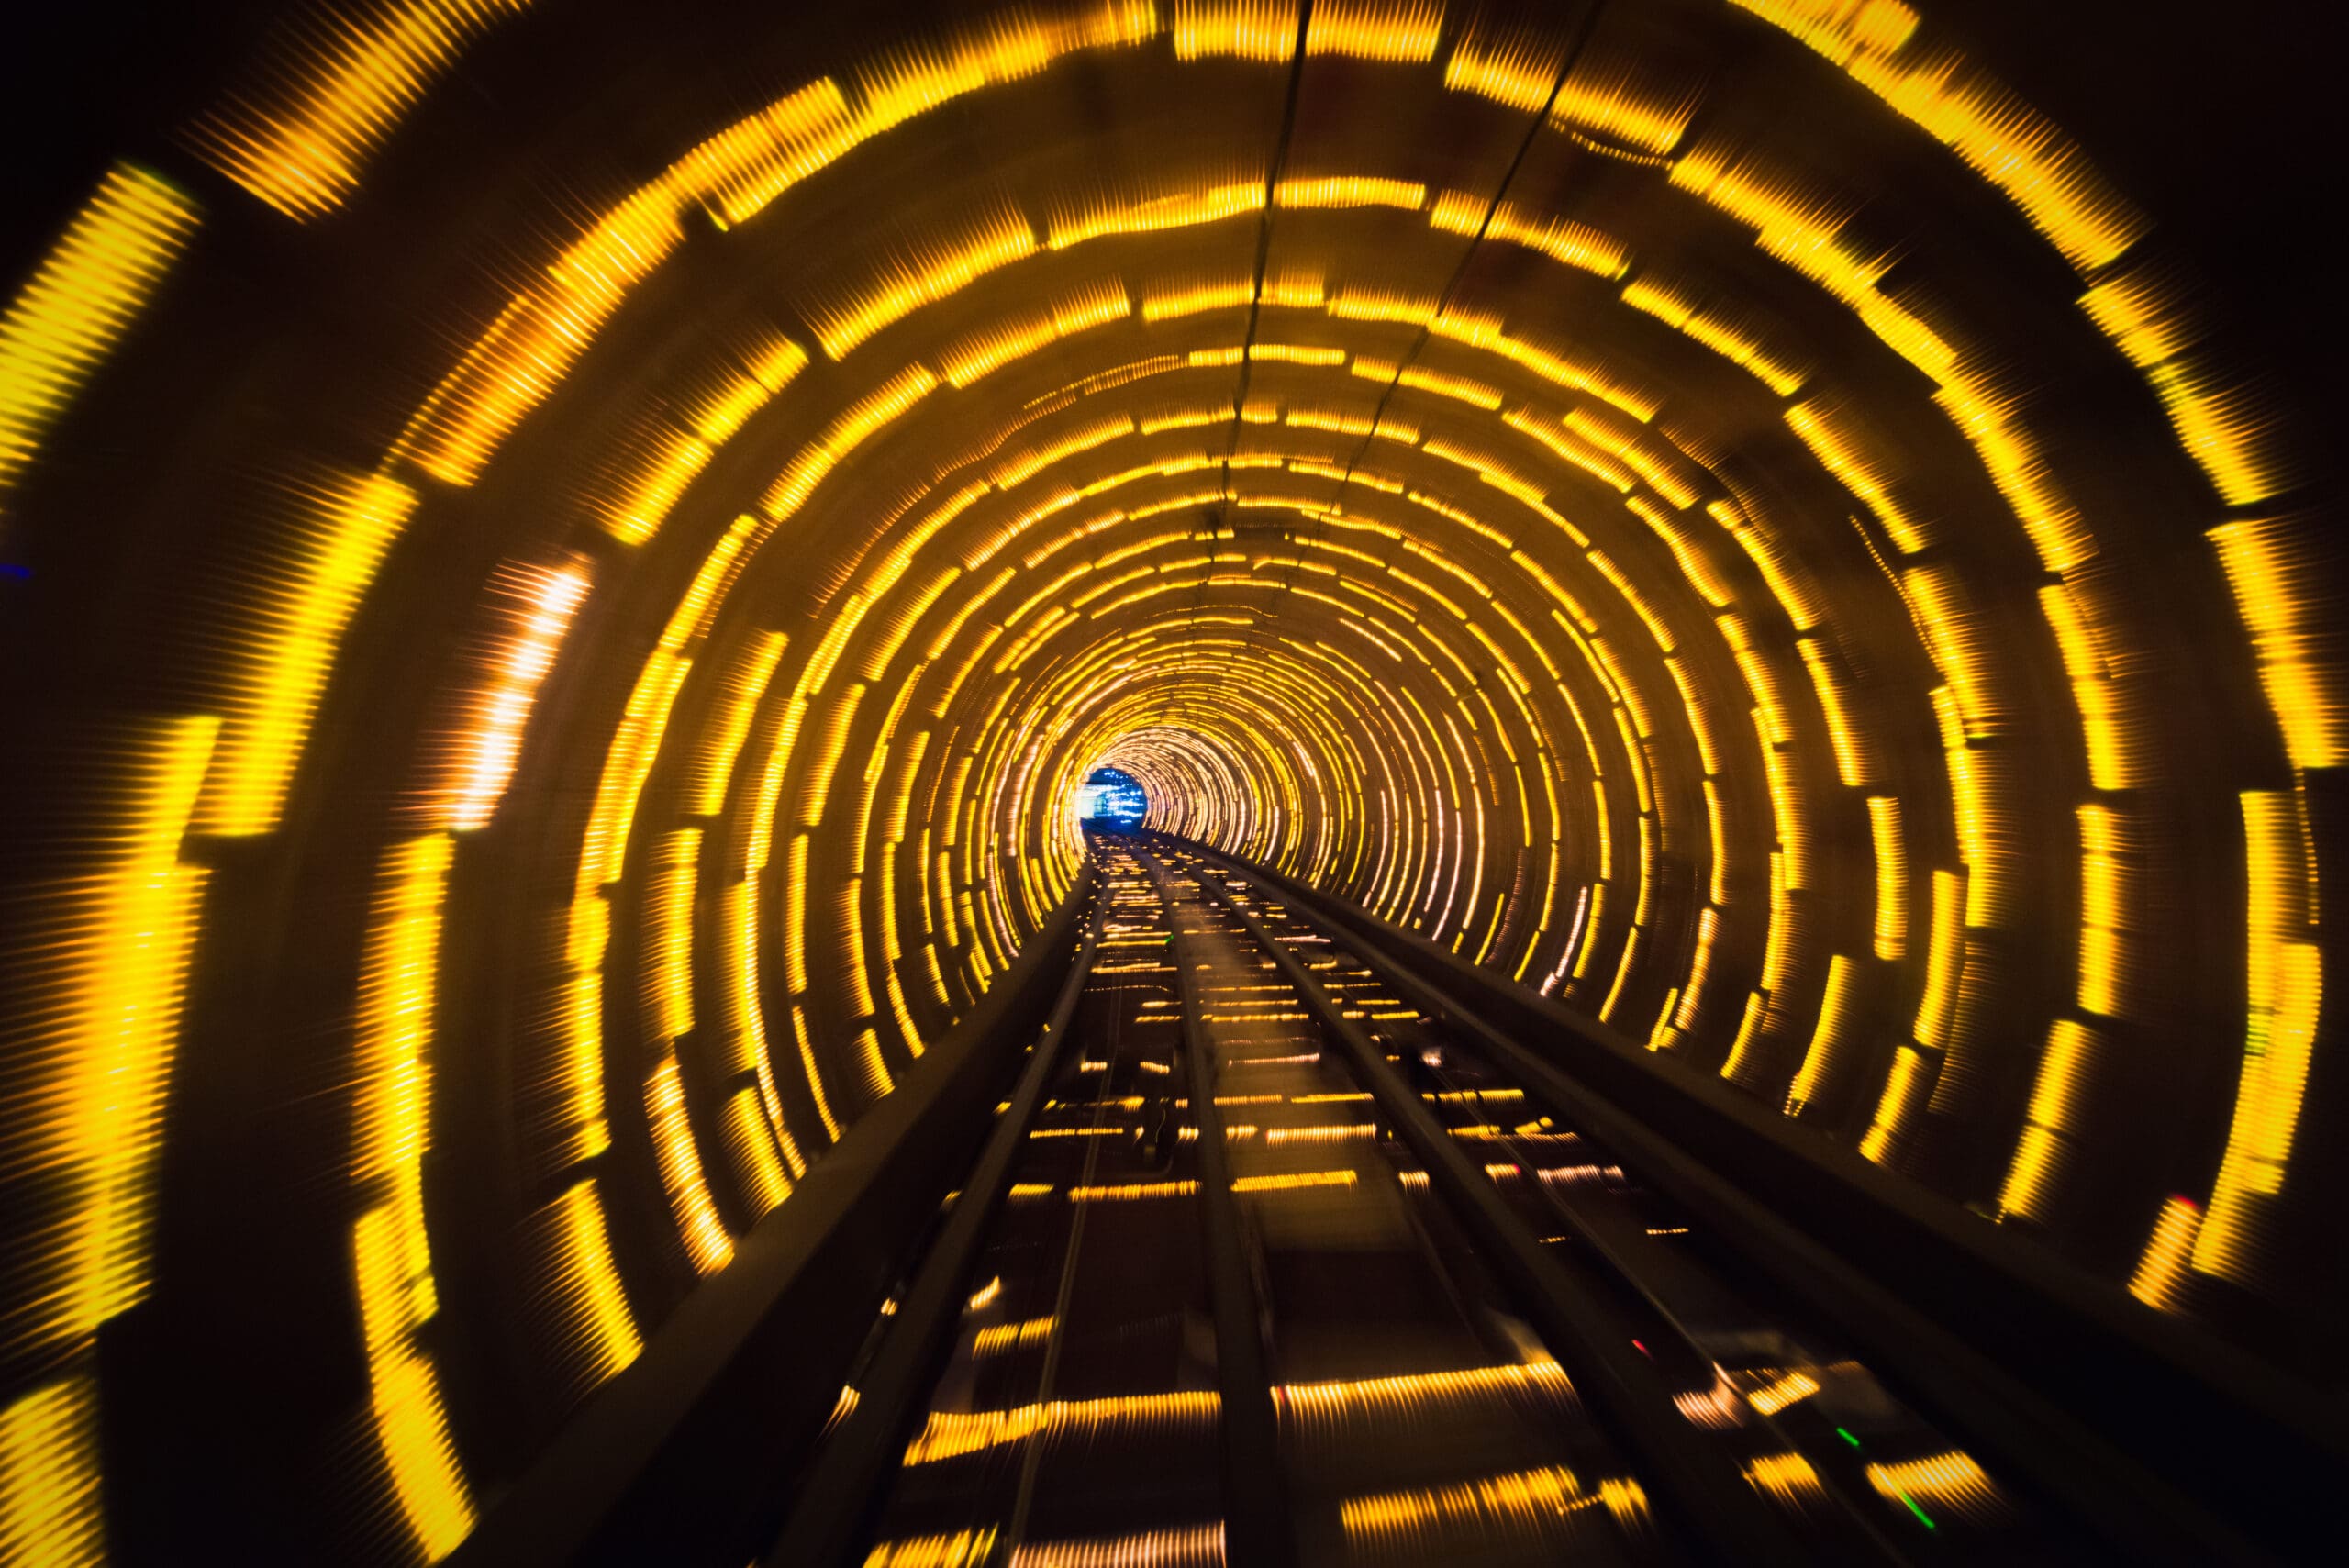 Motion blur on lines of LEDs illuminating a curving rail tunnel in Shanghai, China.